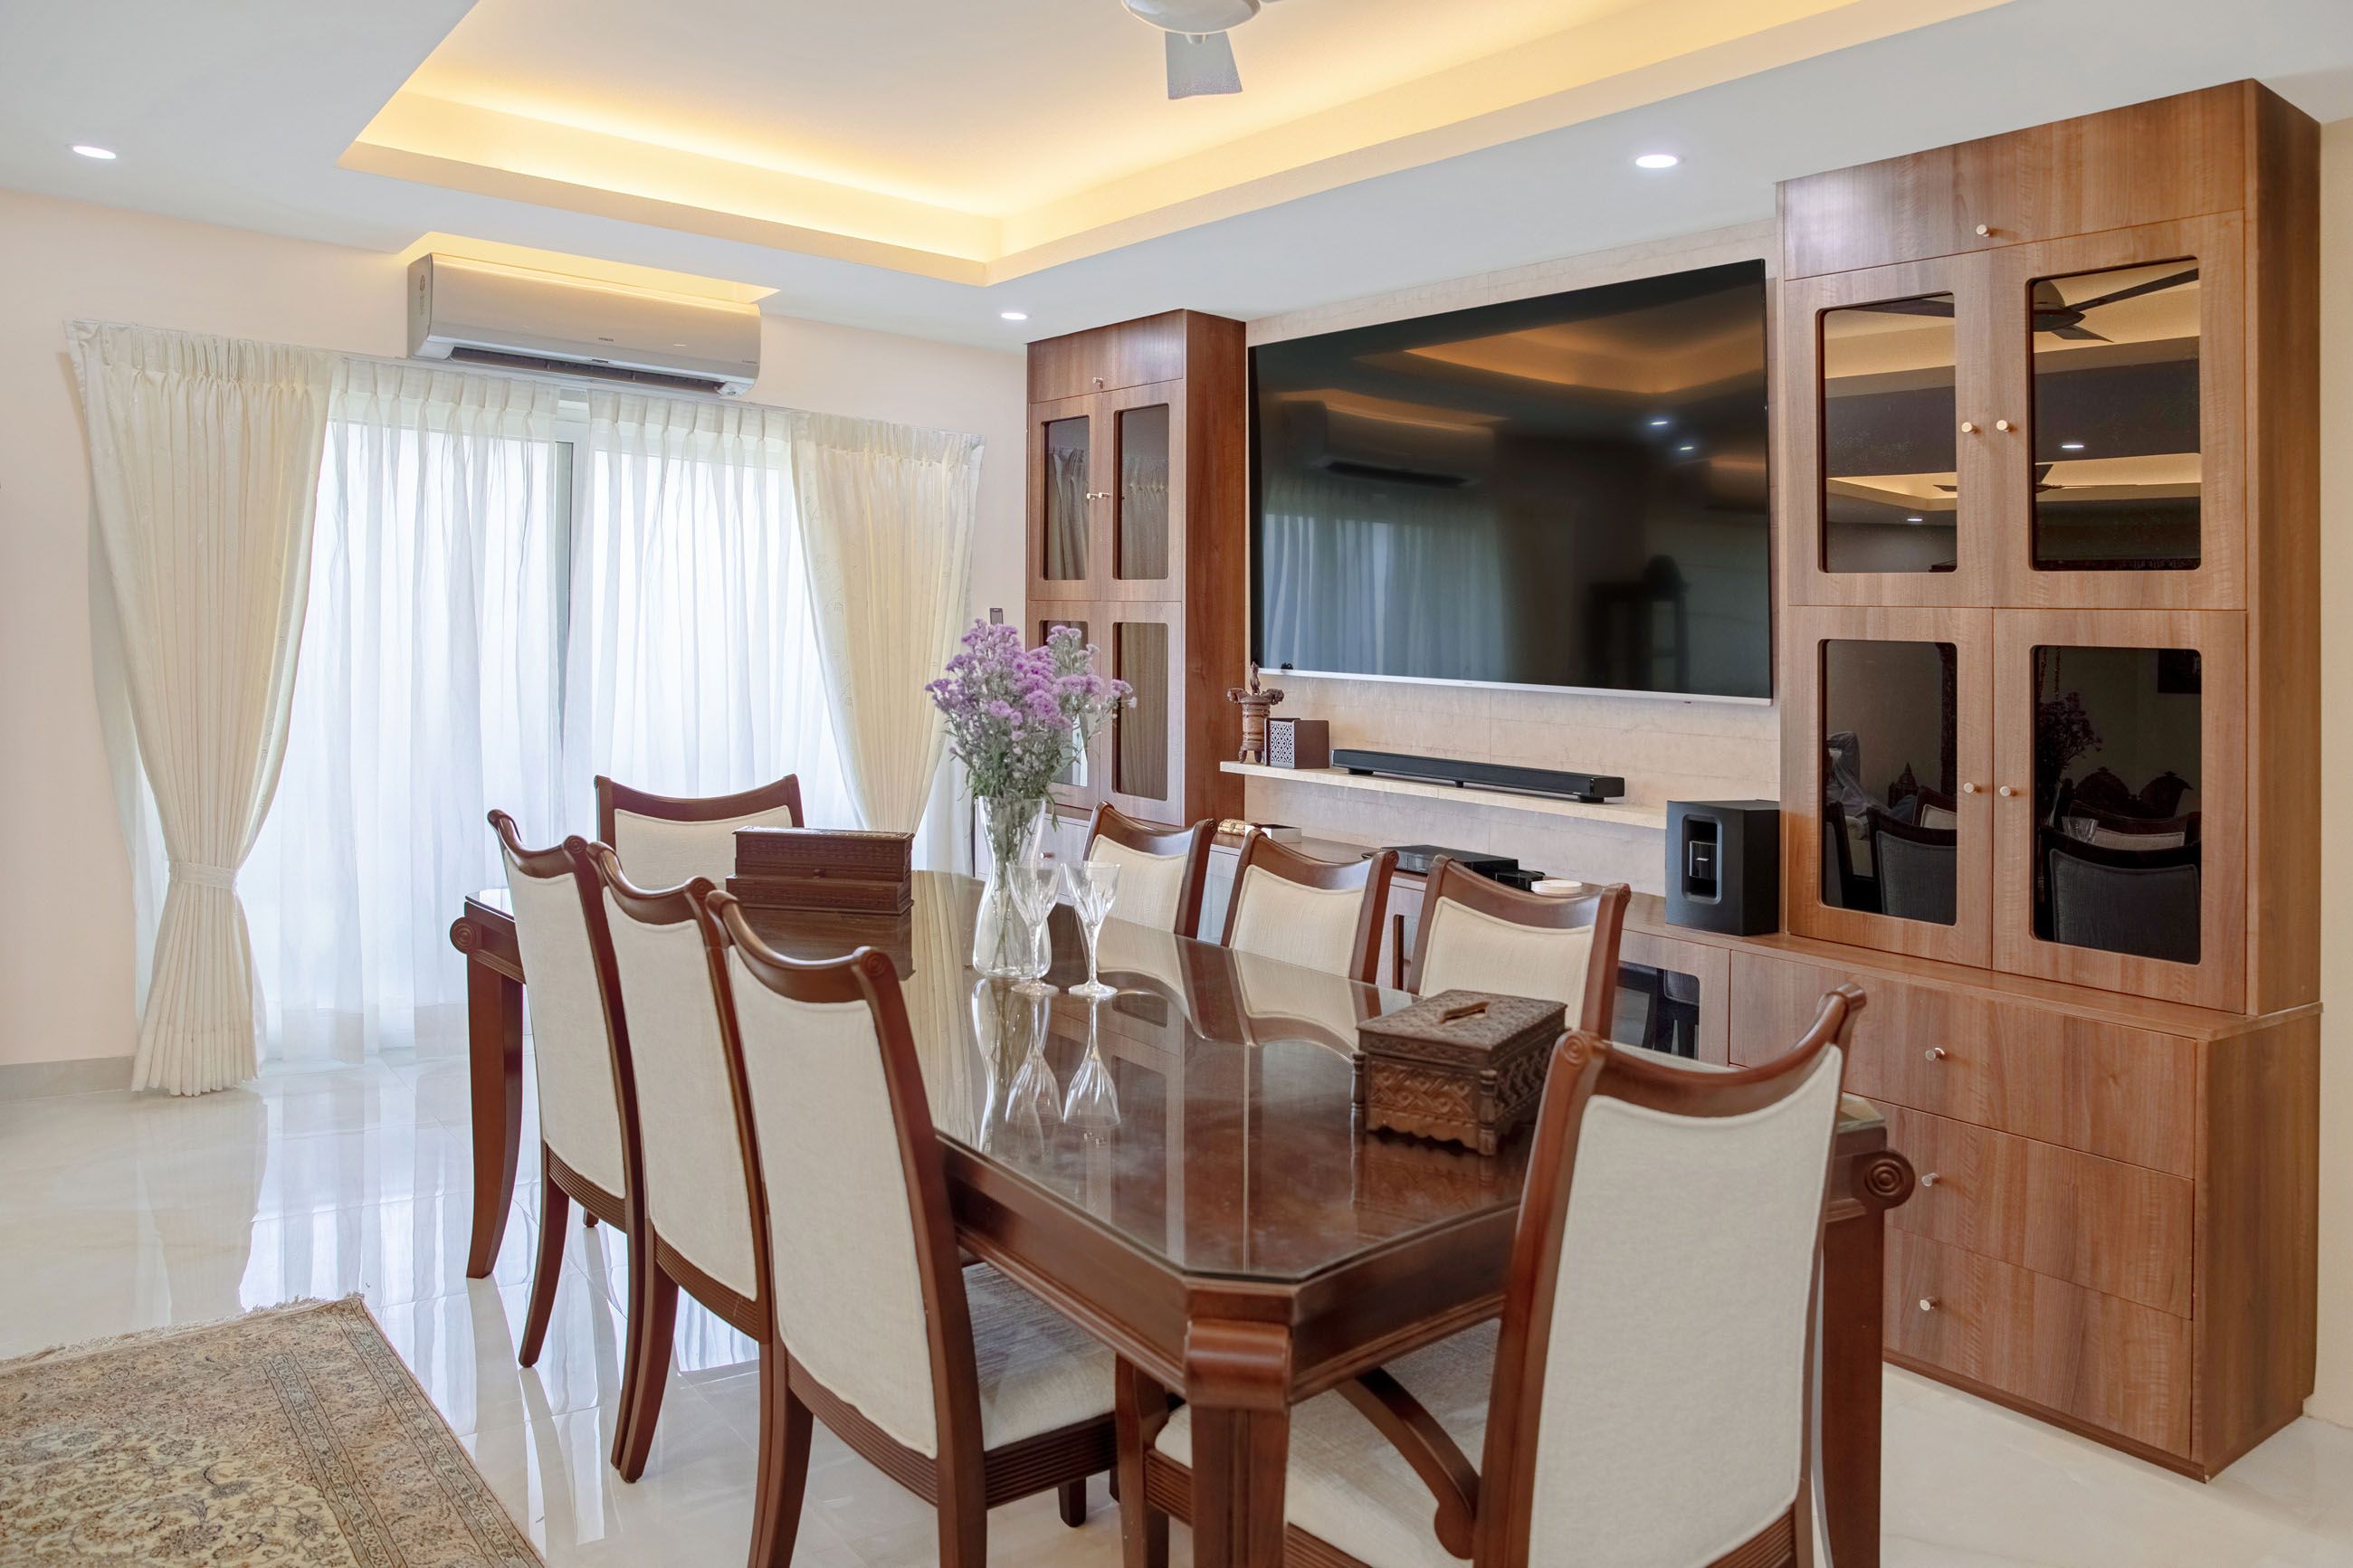 Contemporary Dining Room Design With A Wooden Crockery Unit